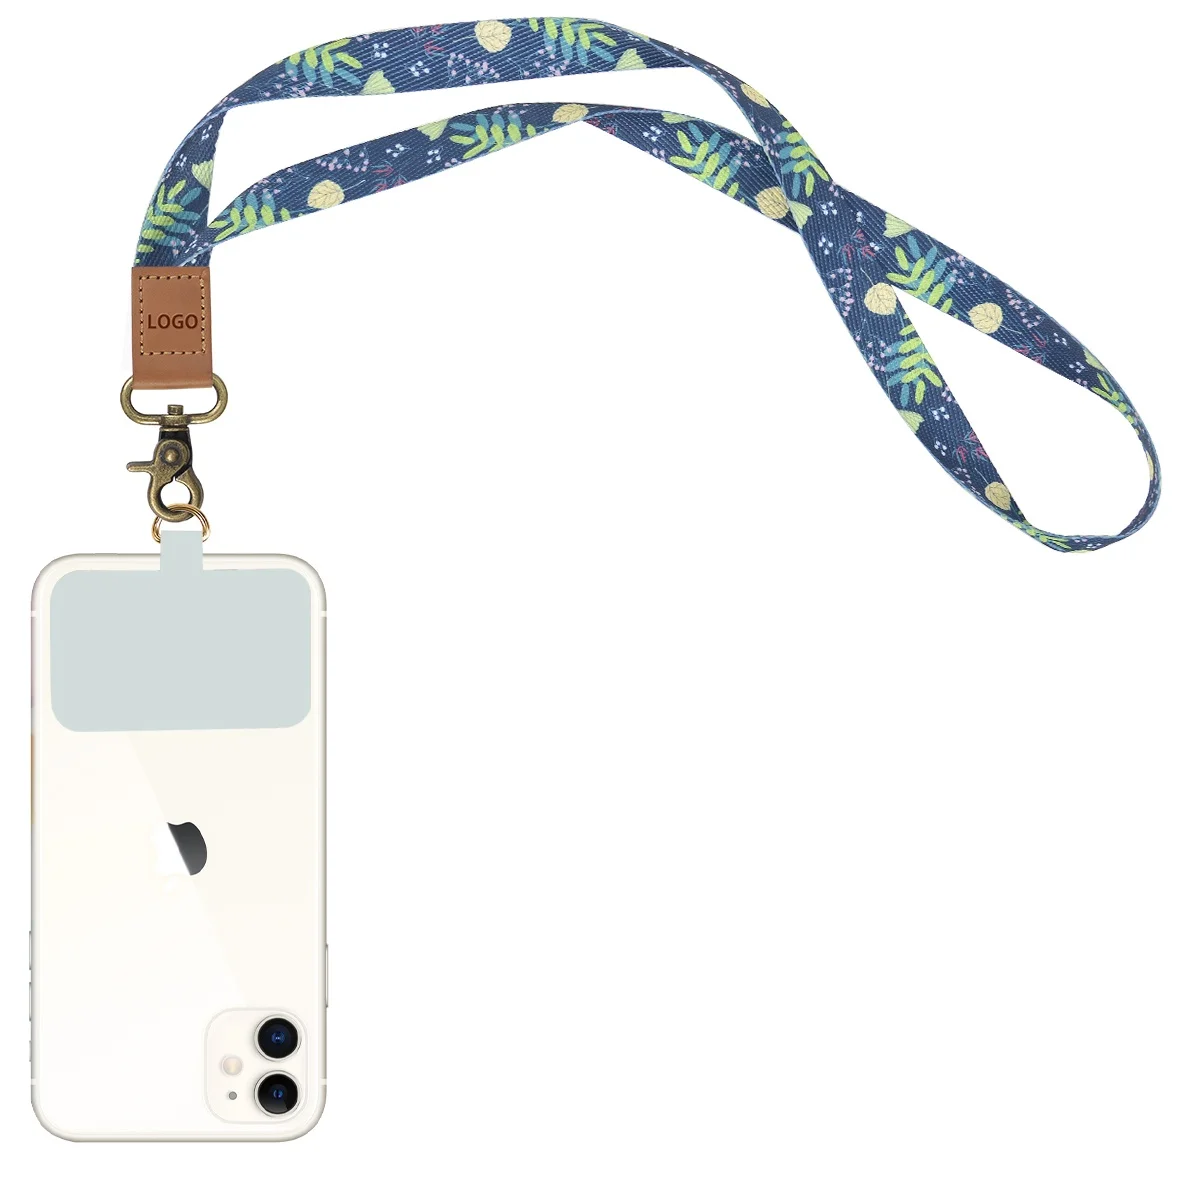 

Custom oem logo and design woven material Card Lanyards Smartphone necklace phone wrist strap lanyard with Keychain